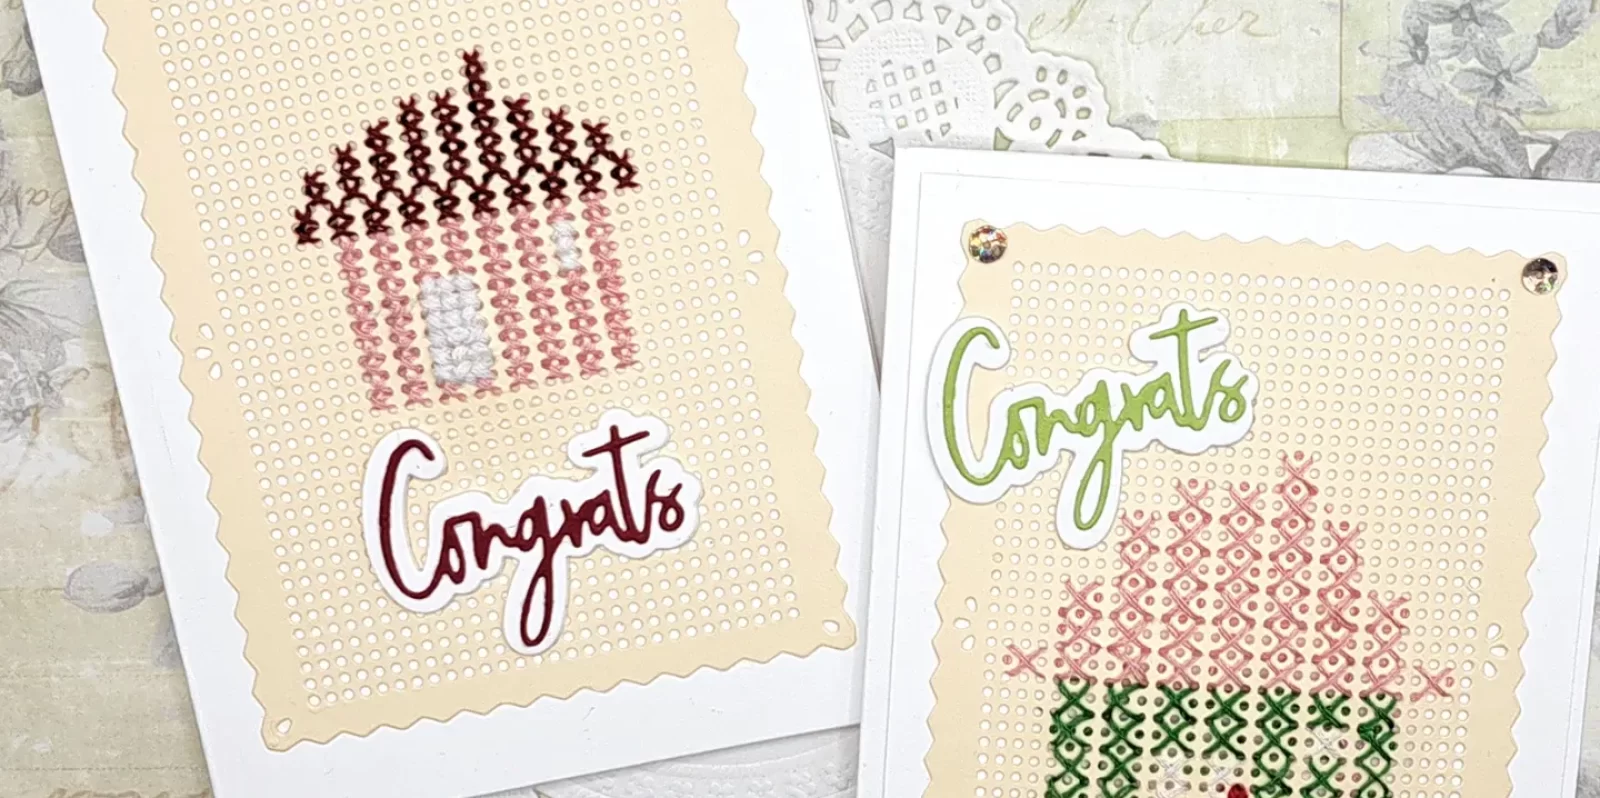 Freehand Cross-Stitched Cards